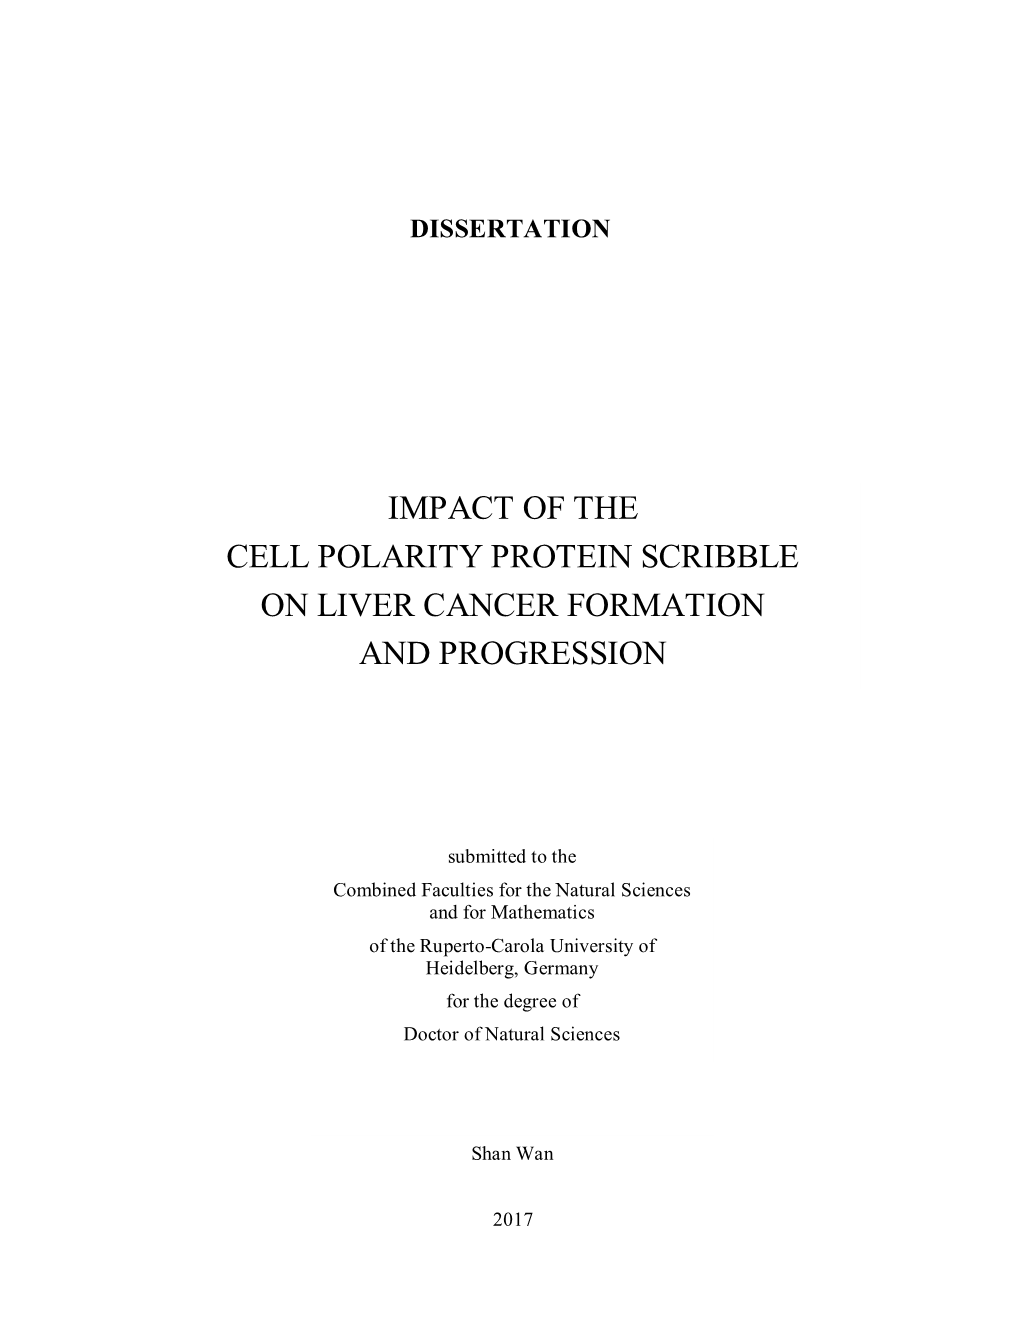 Impact of the Cell Polarity Protein Scribble on Liver Cancer Formation and Progression